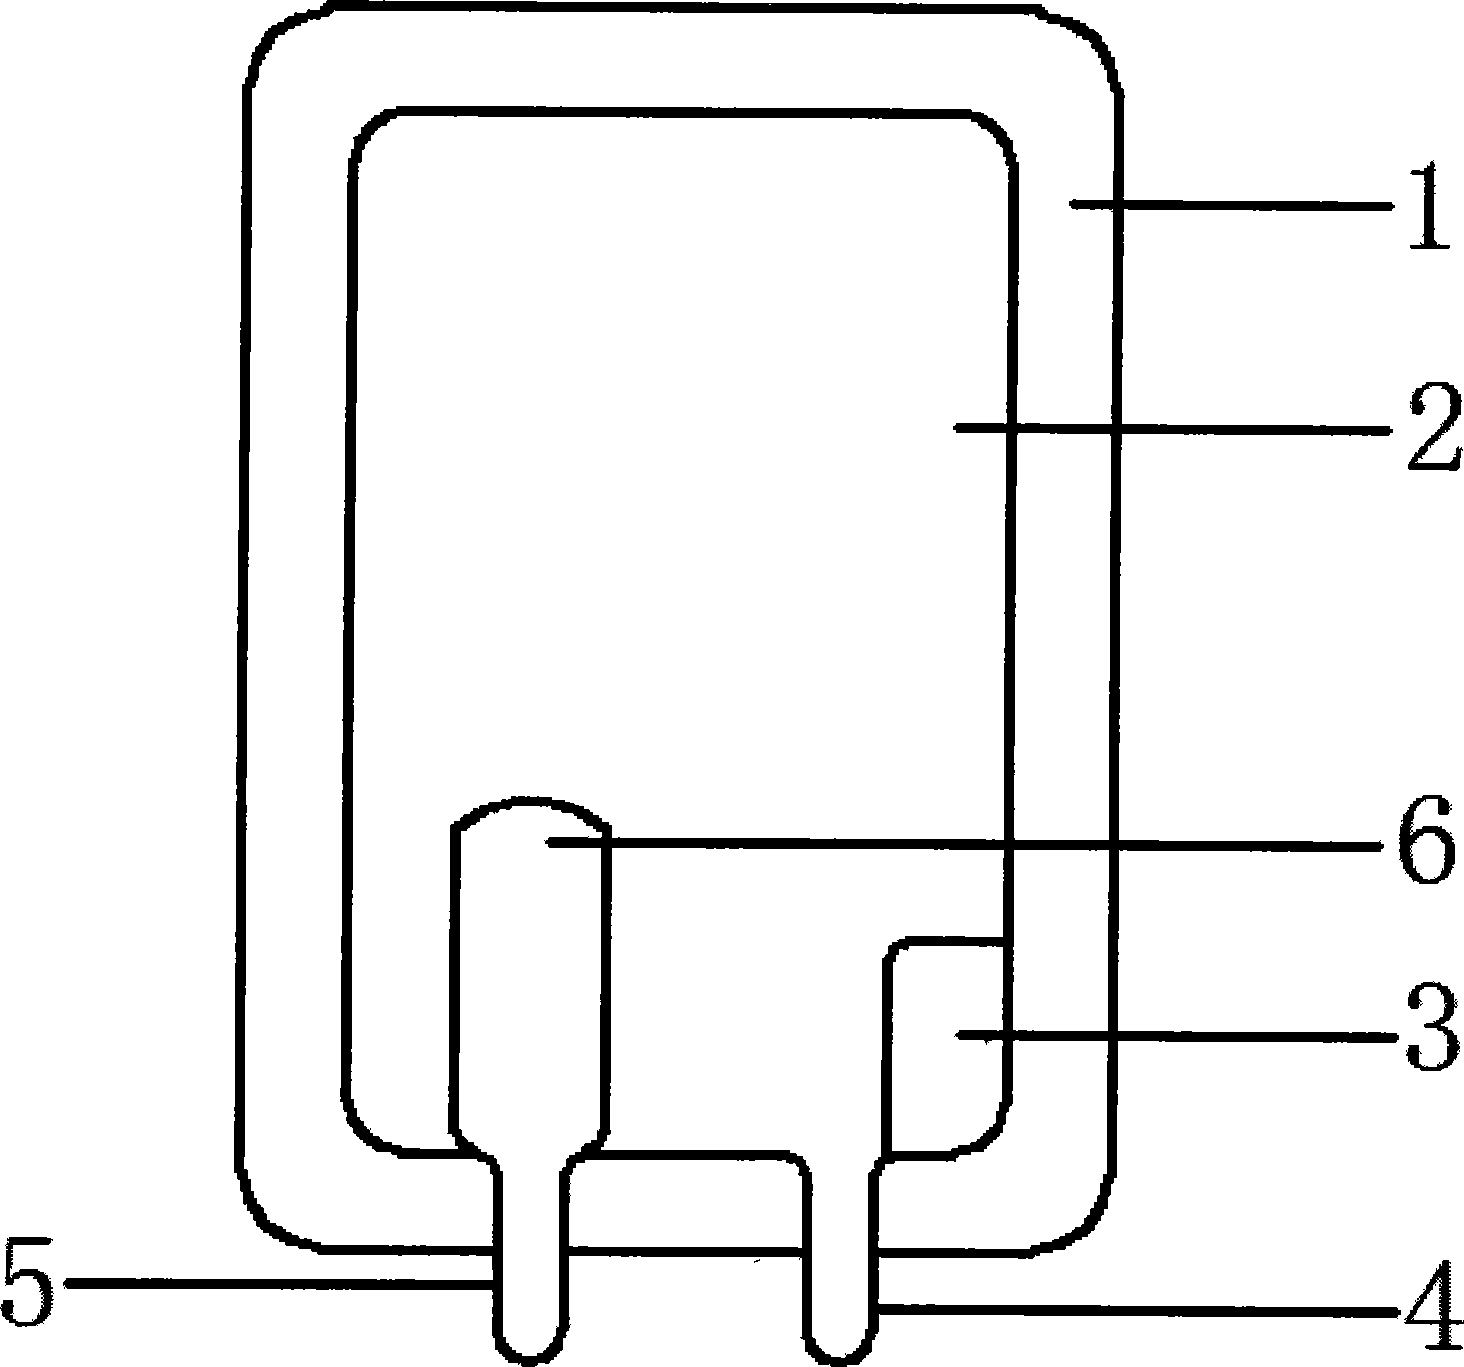 Heating method and energy-conserving device for preheating and immediately bi-mode heating energy saving water heater